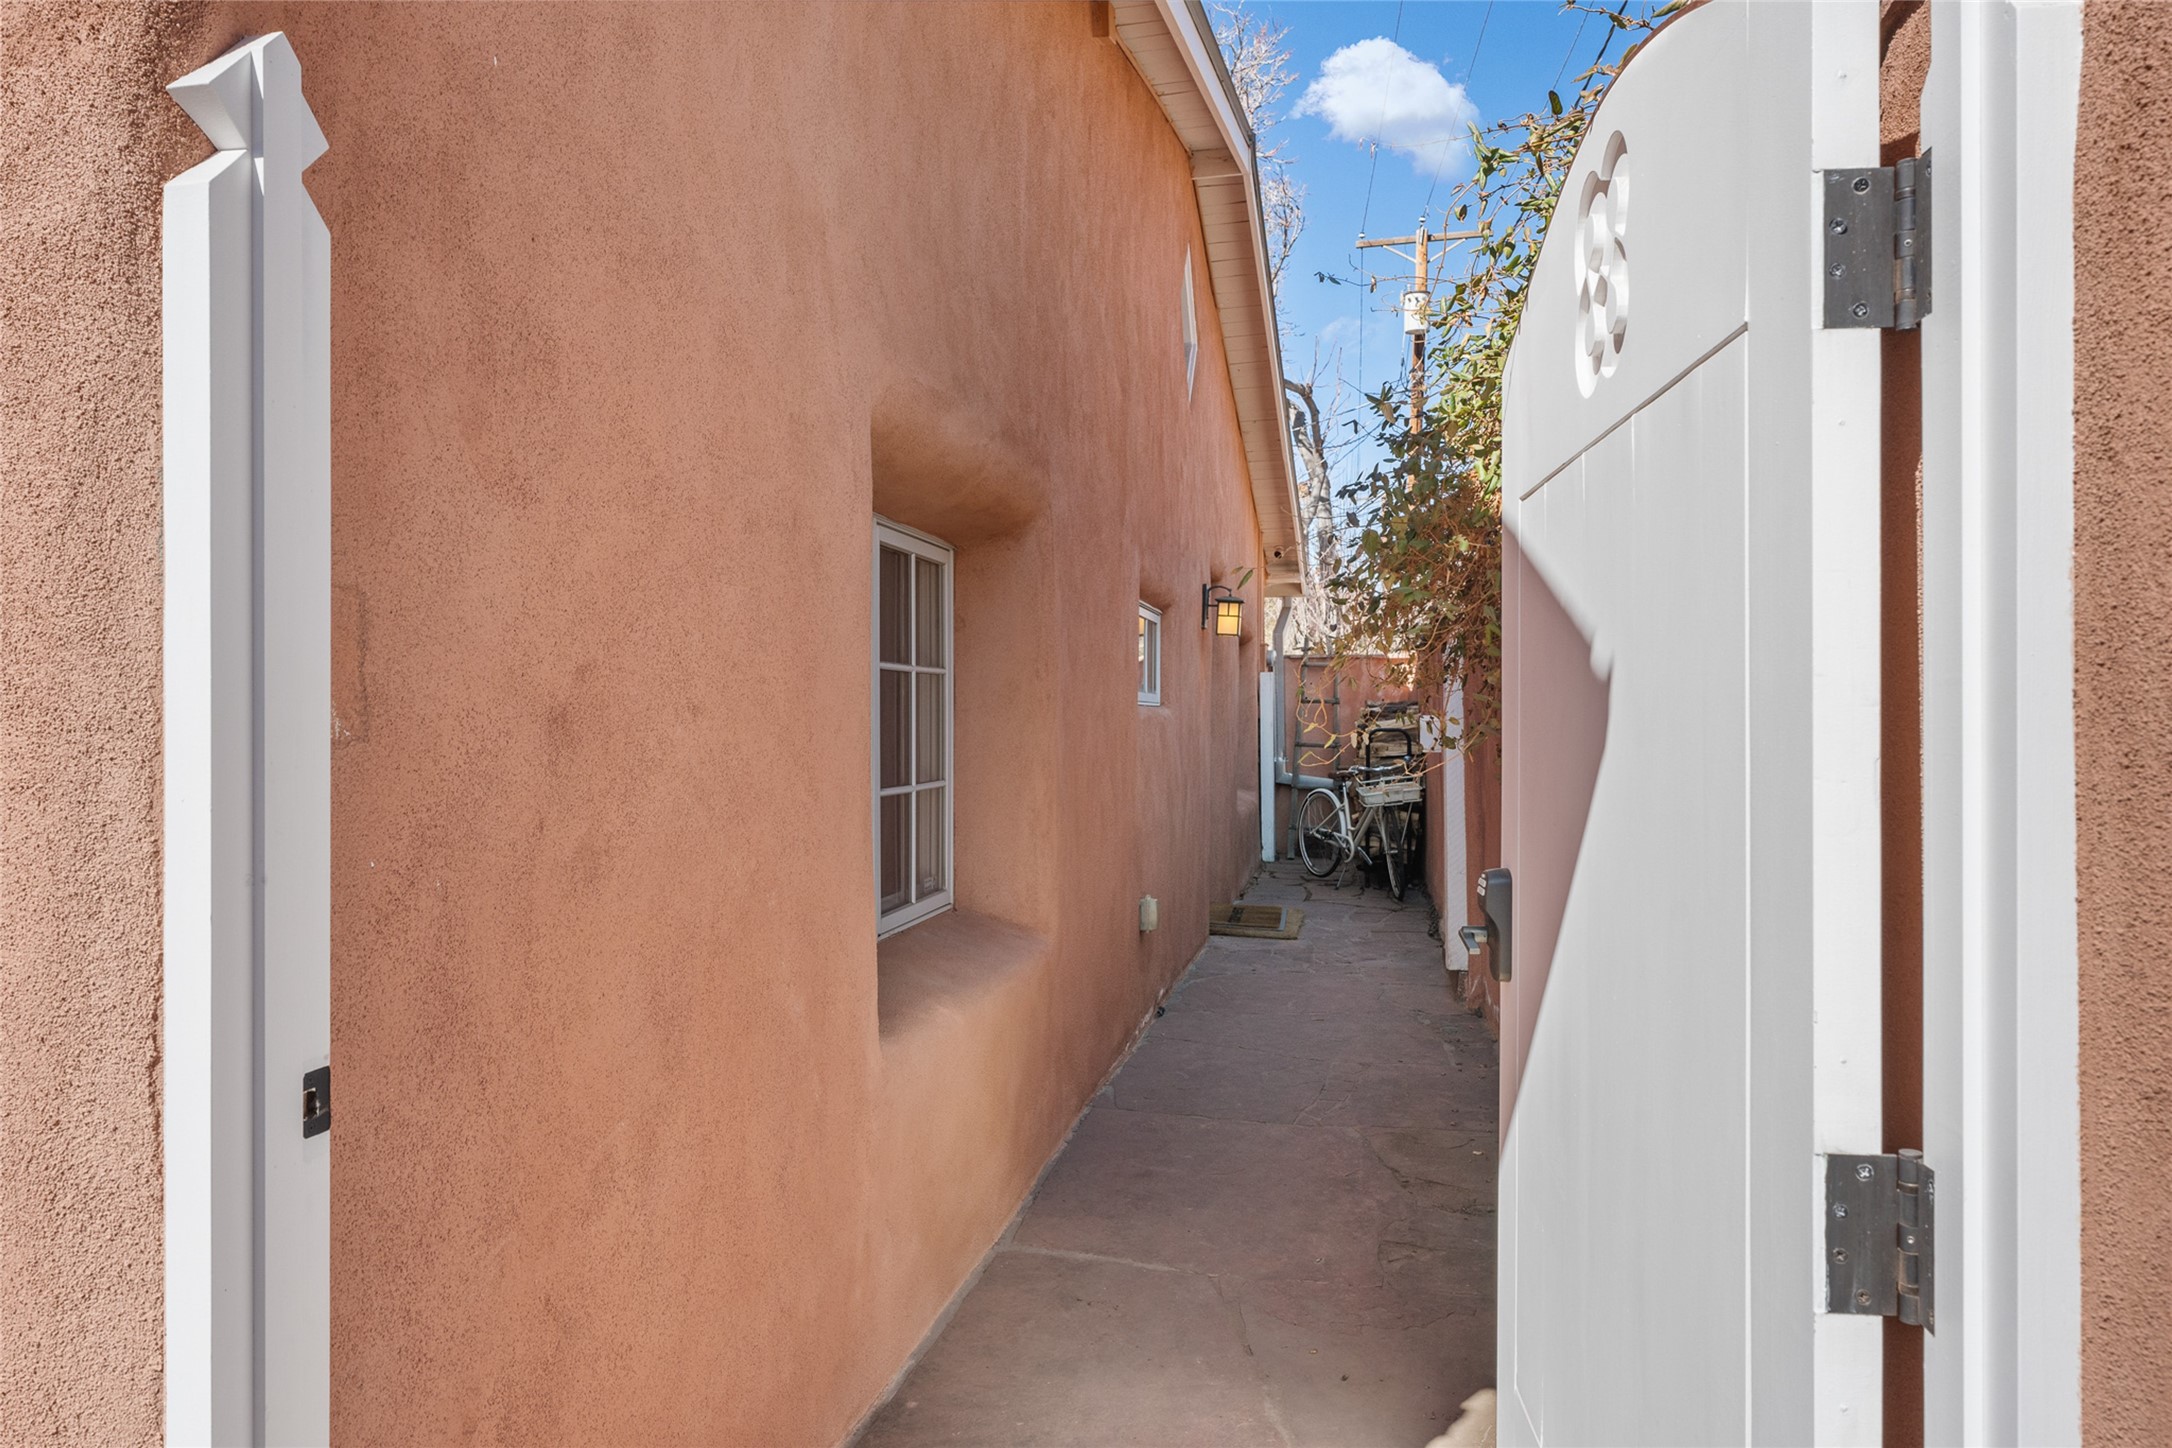 864 E Palace Avenue, Santa Fe, New Mexico 87501, 2 Bedrooms Bedrooms, ,2 BathroomsBathrooms,Residential,For Sale,864 E Palace Avenue,202400106